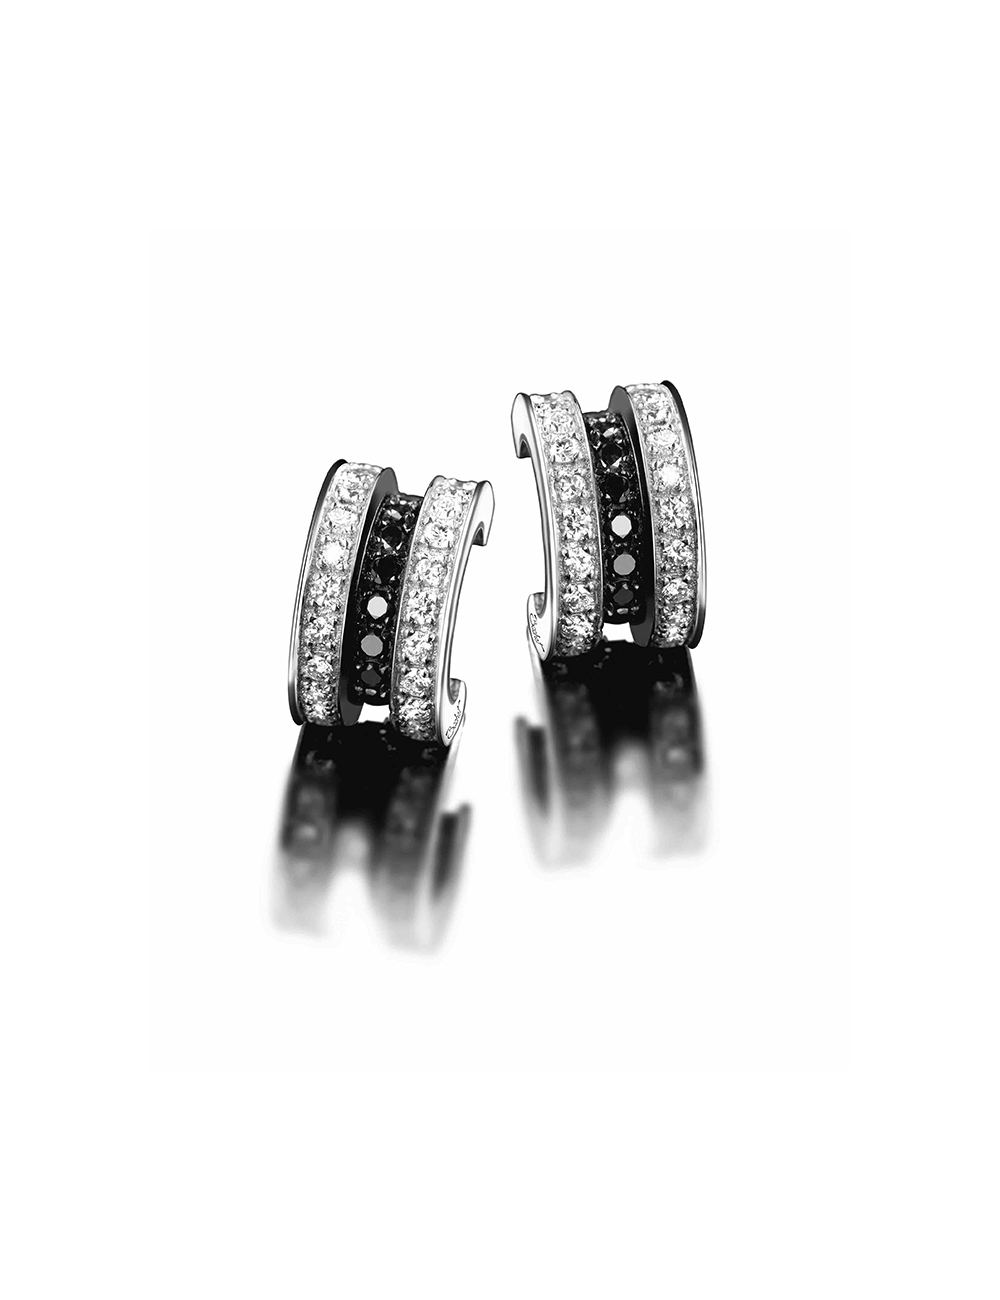 Contrasting elegance: D.Bachet hoops with black and white diamonds in white gold.